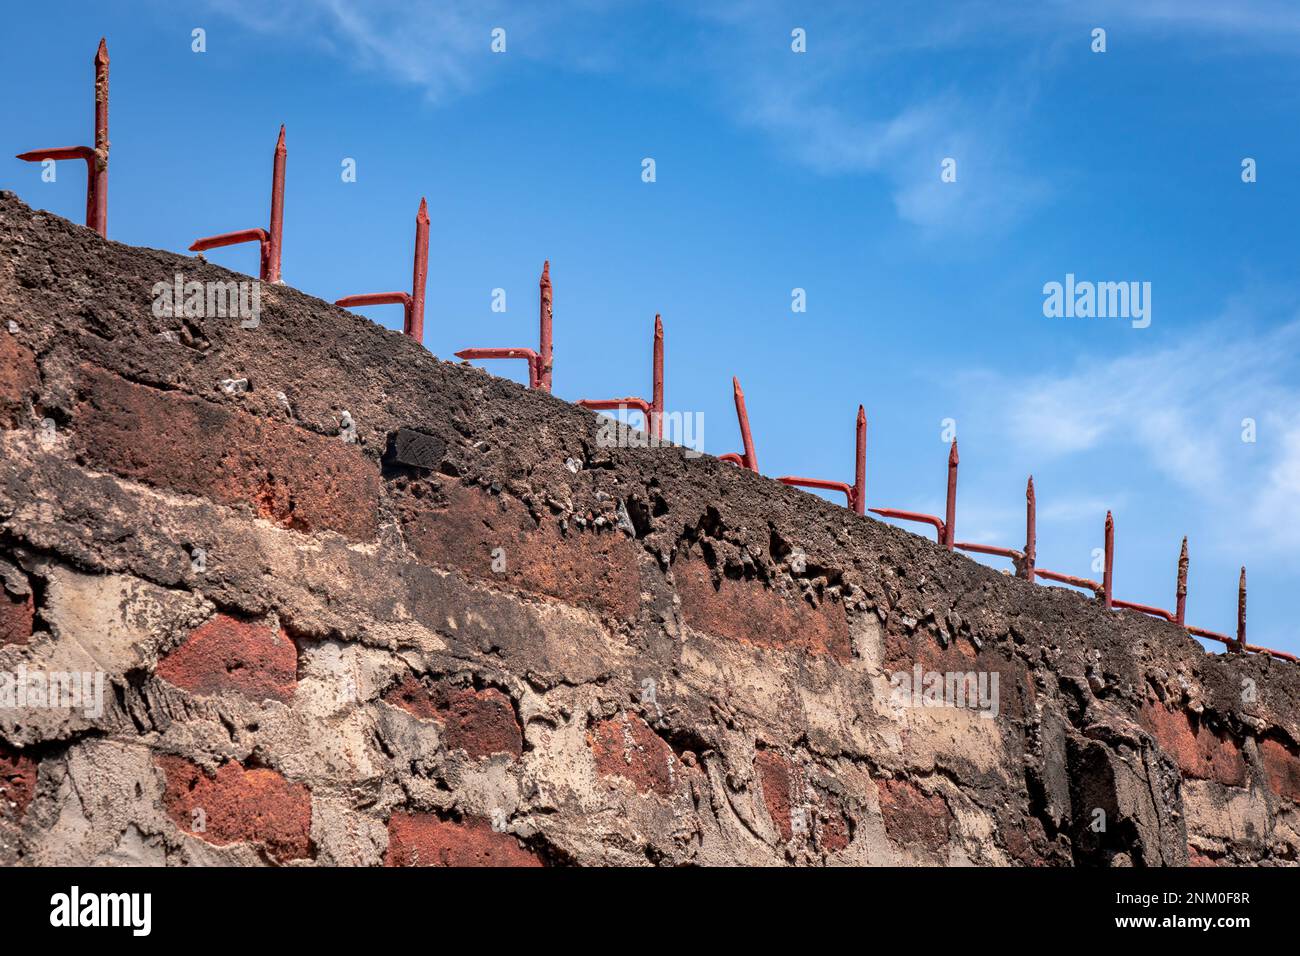 Red brick wall with sharp spikes on top. Clear blue sky with clouds. Theme for jail and freedom. Stock Photo